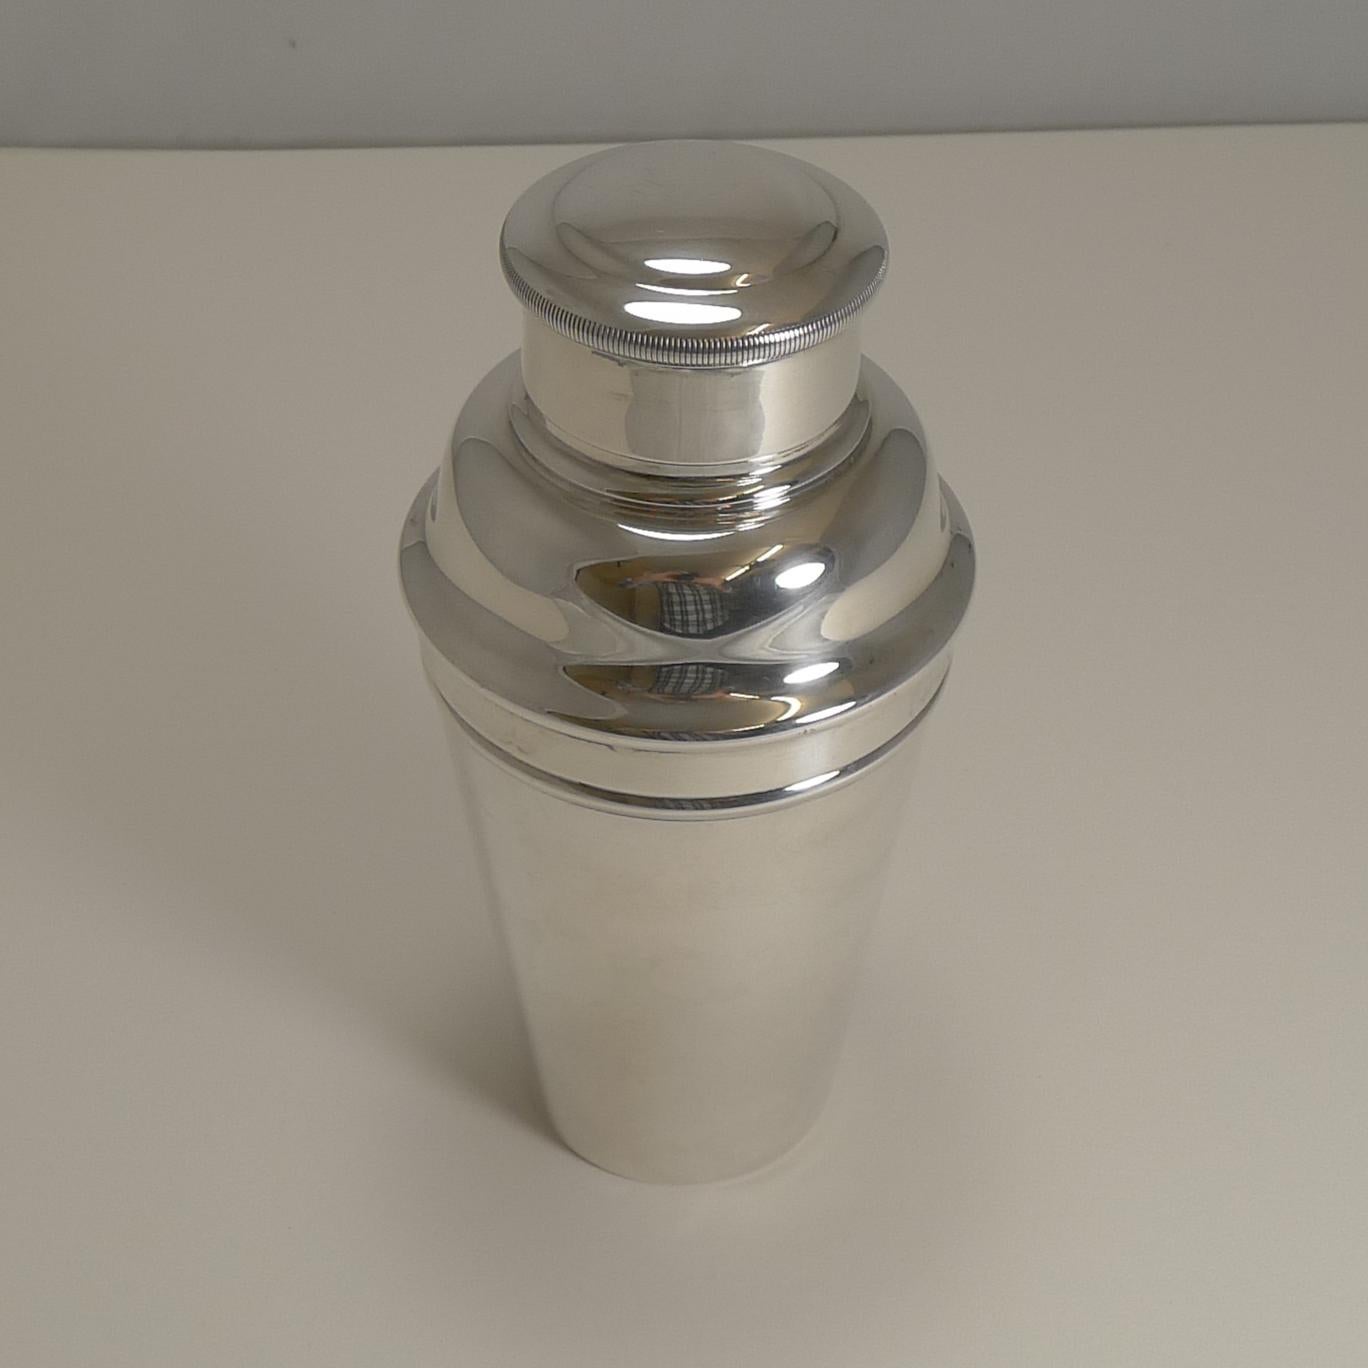 English Art Deco Cocktail Shaker With Integral Ice Crusher by William Sturtcliffe